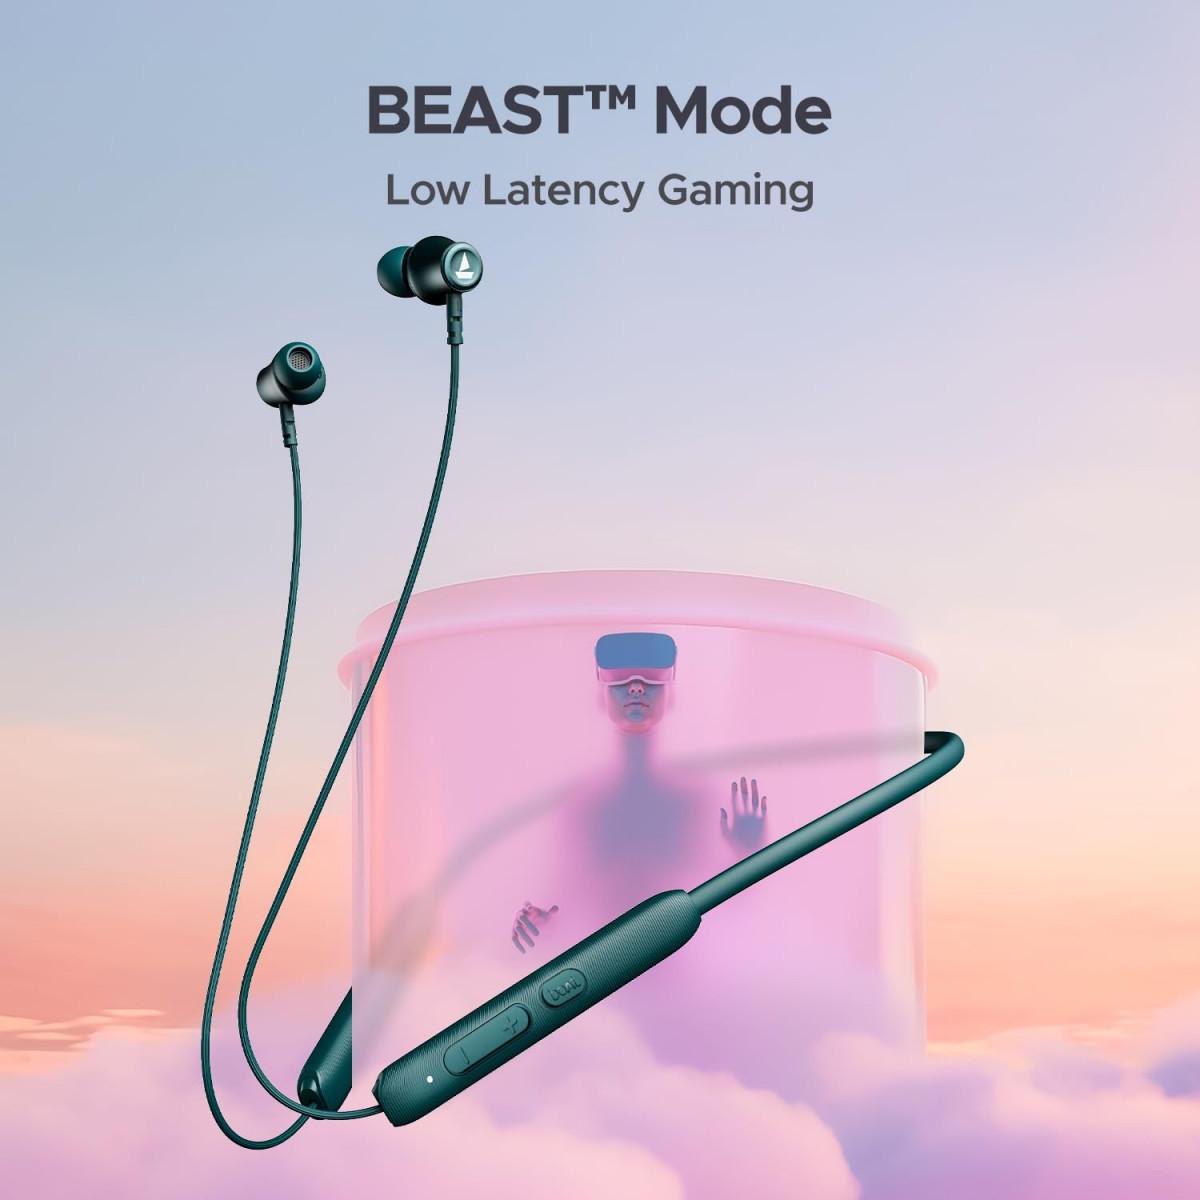 boAt Rockerz 245 V2 Pro Wireless in Ear Neckband with Up to 30 Hrs Playtime Enx Tech Asap Charge Beast Mode Dual Pairing Magnetic BudsUSB Type-C InterfaceIpx5Teal Green